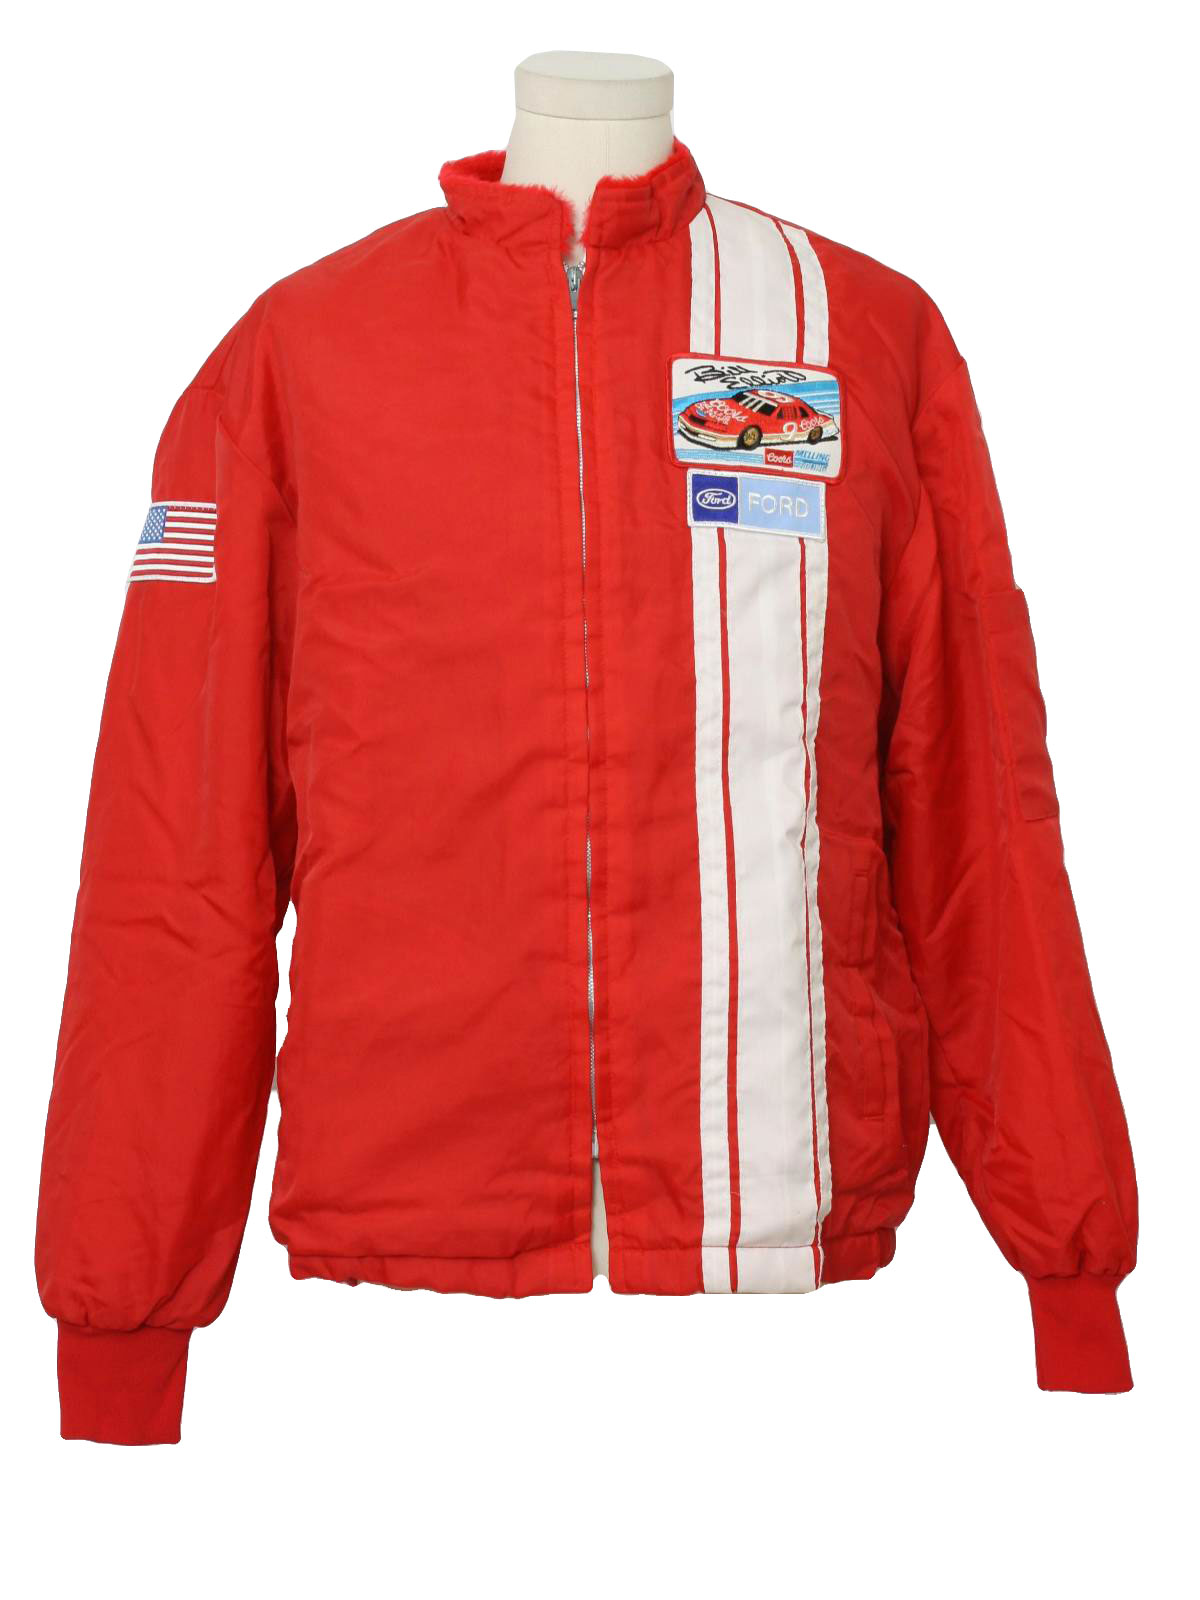 Vintage 1980's Jacket: 80s -Great Lakes Sportswear- Mens red and white ...